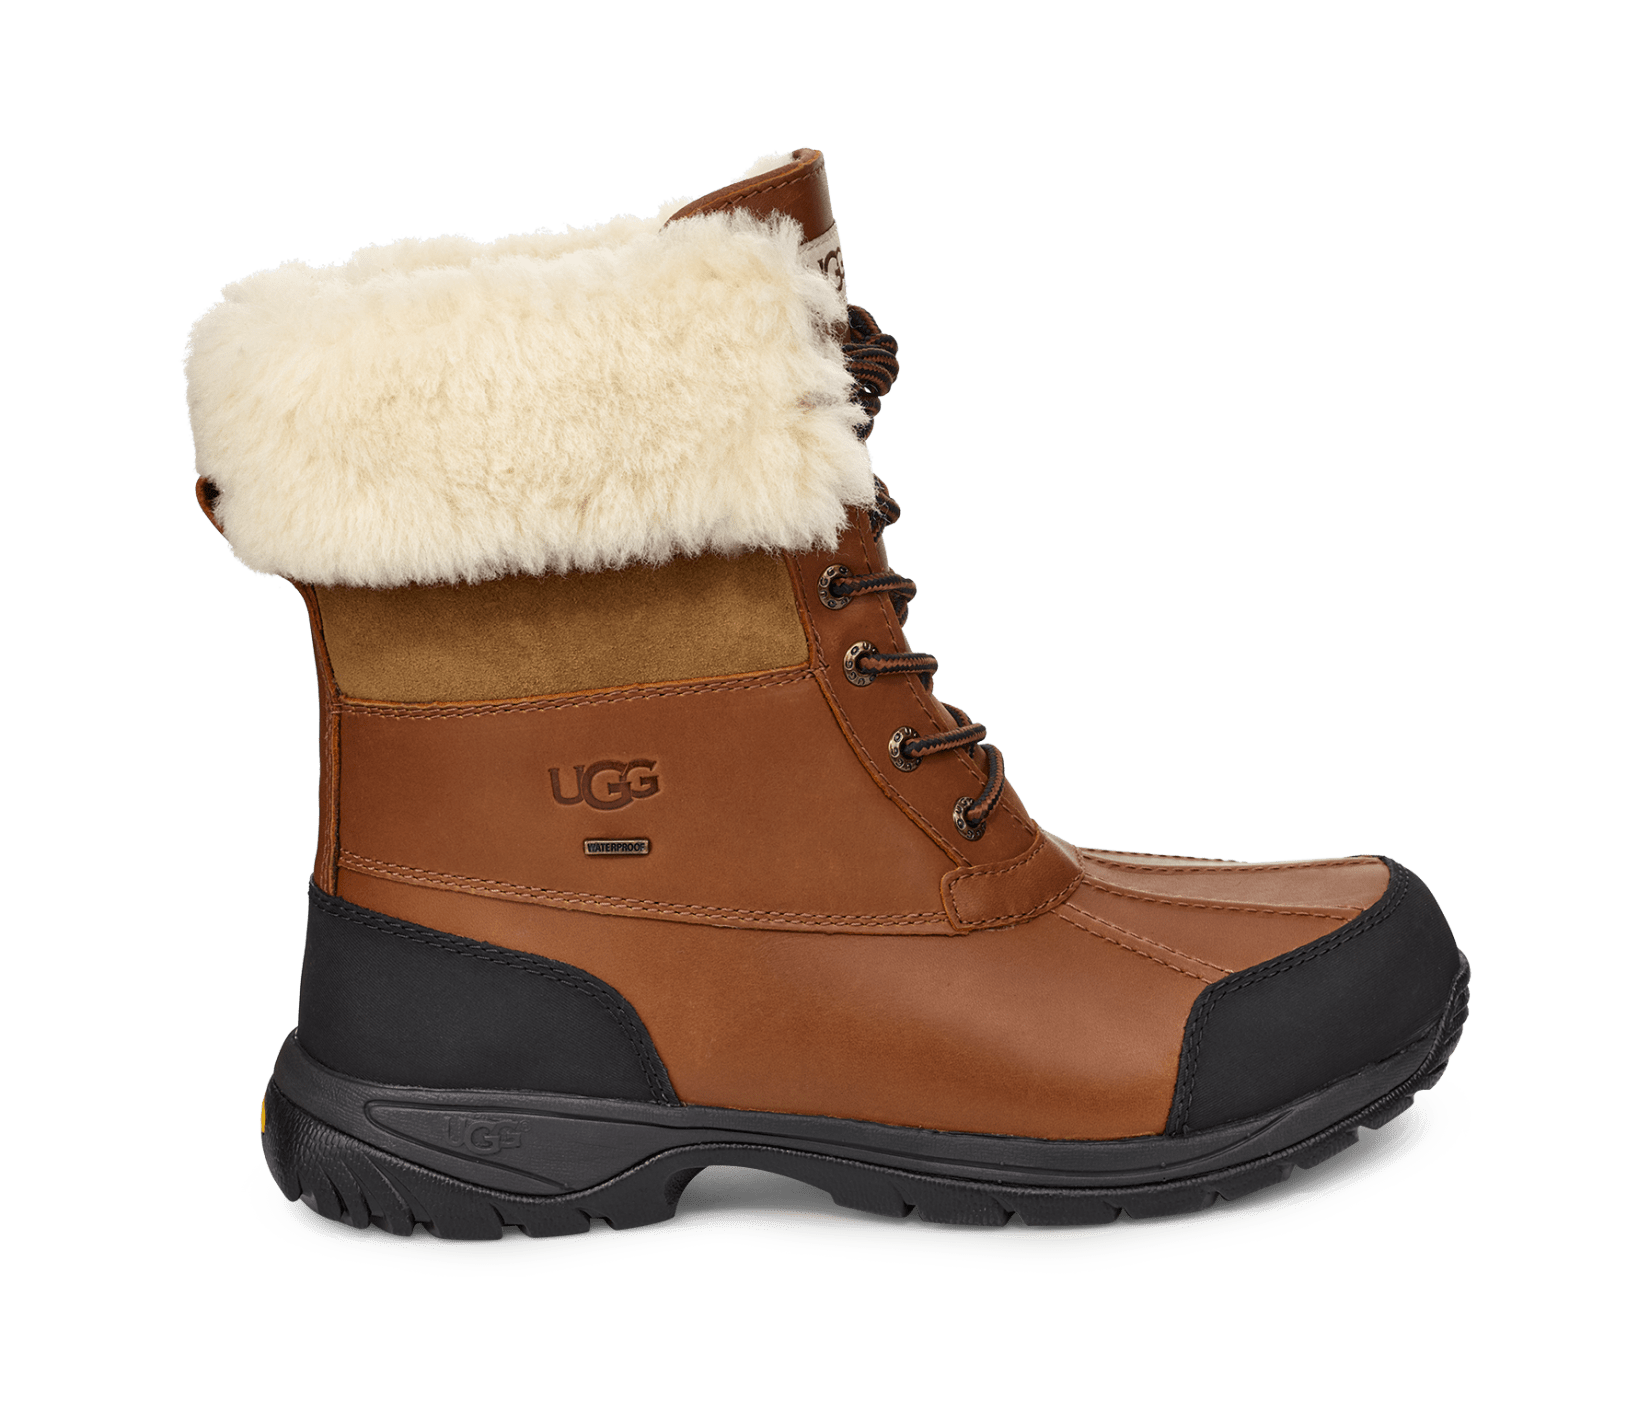 ugg boots winter outfit  Uggs outfit, Work outfits women, Ugg boots